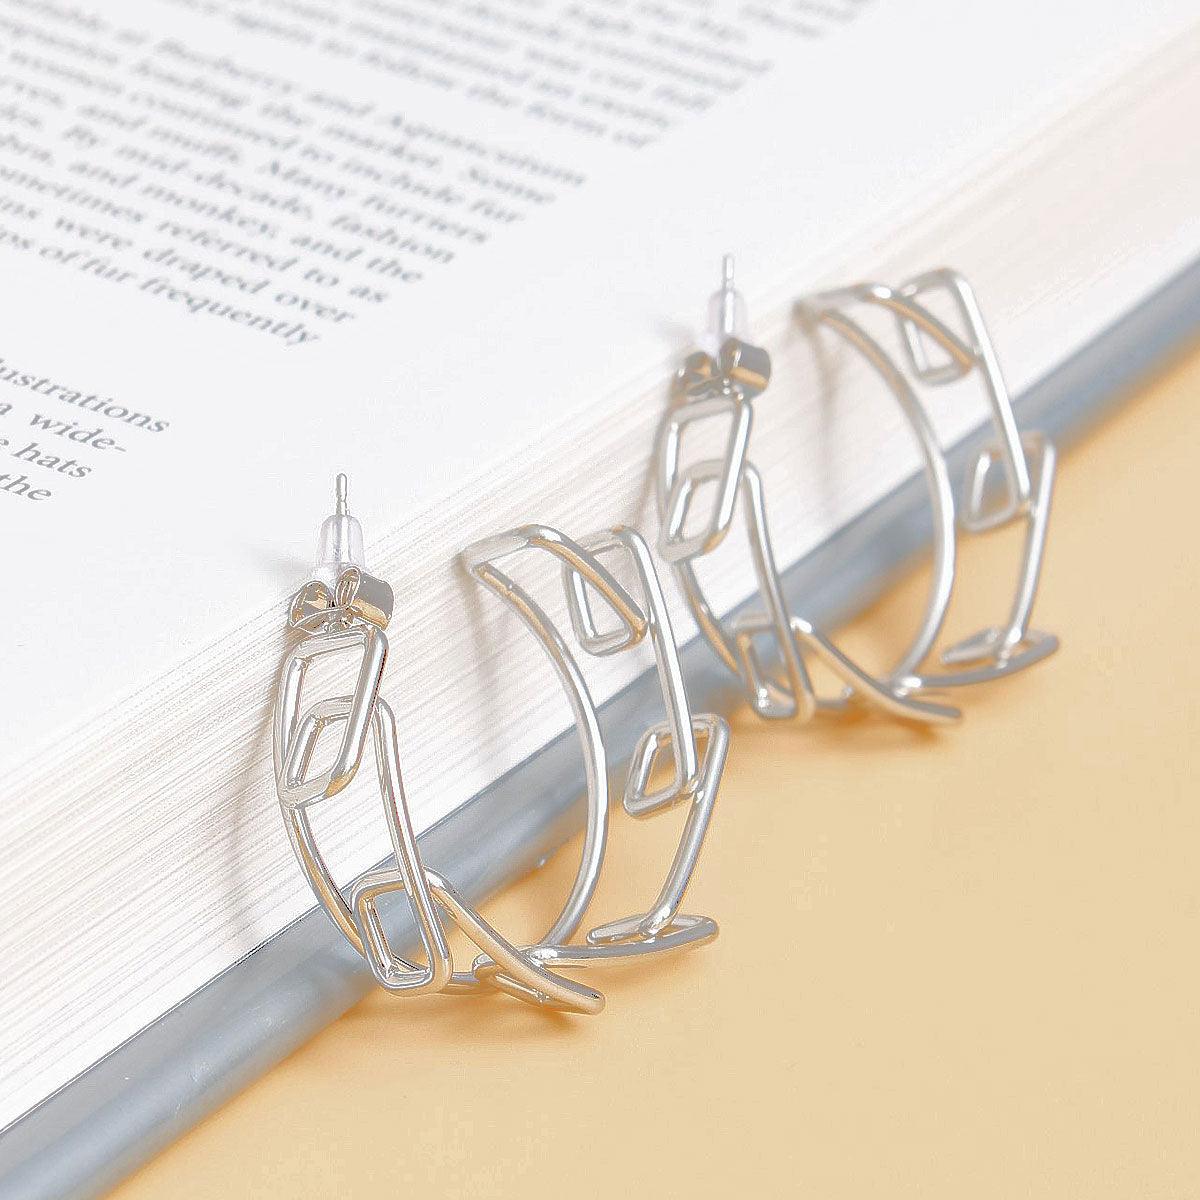 Fashion Jewelry: Upgrade Your Style with Stunning White Gold Geo Wire Hoop Earrings